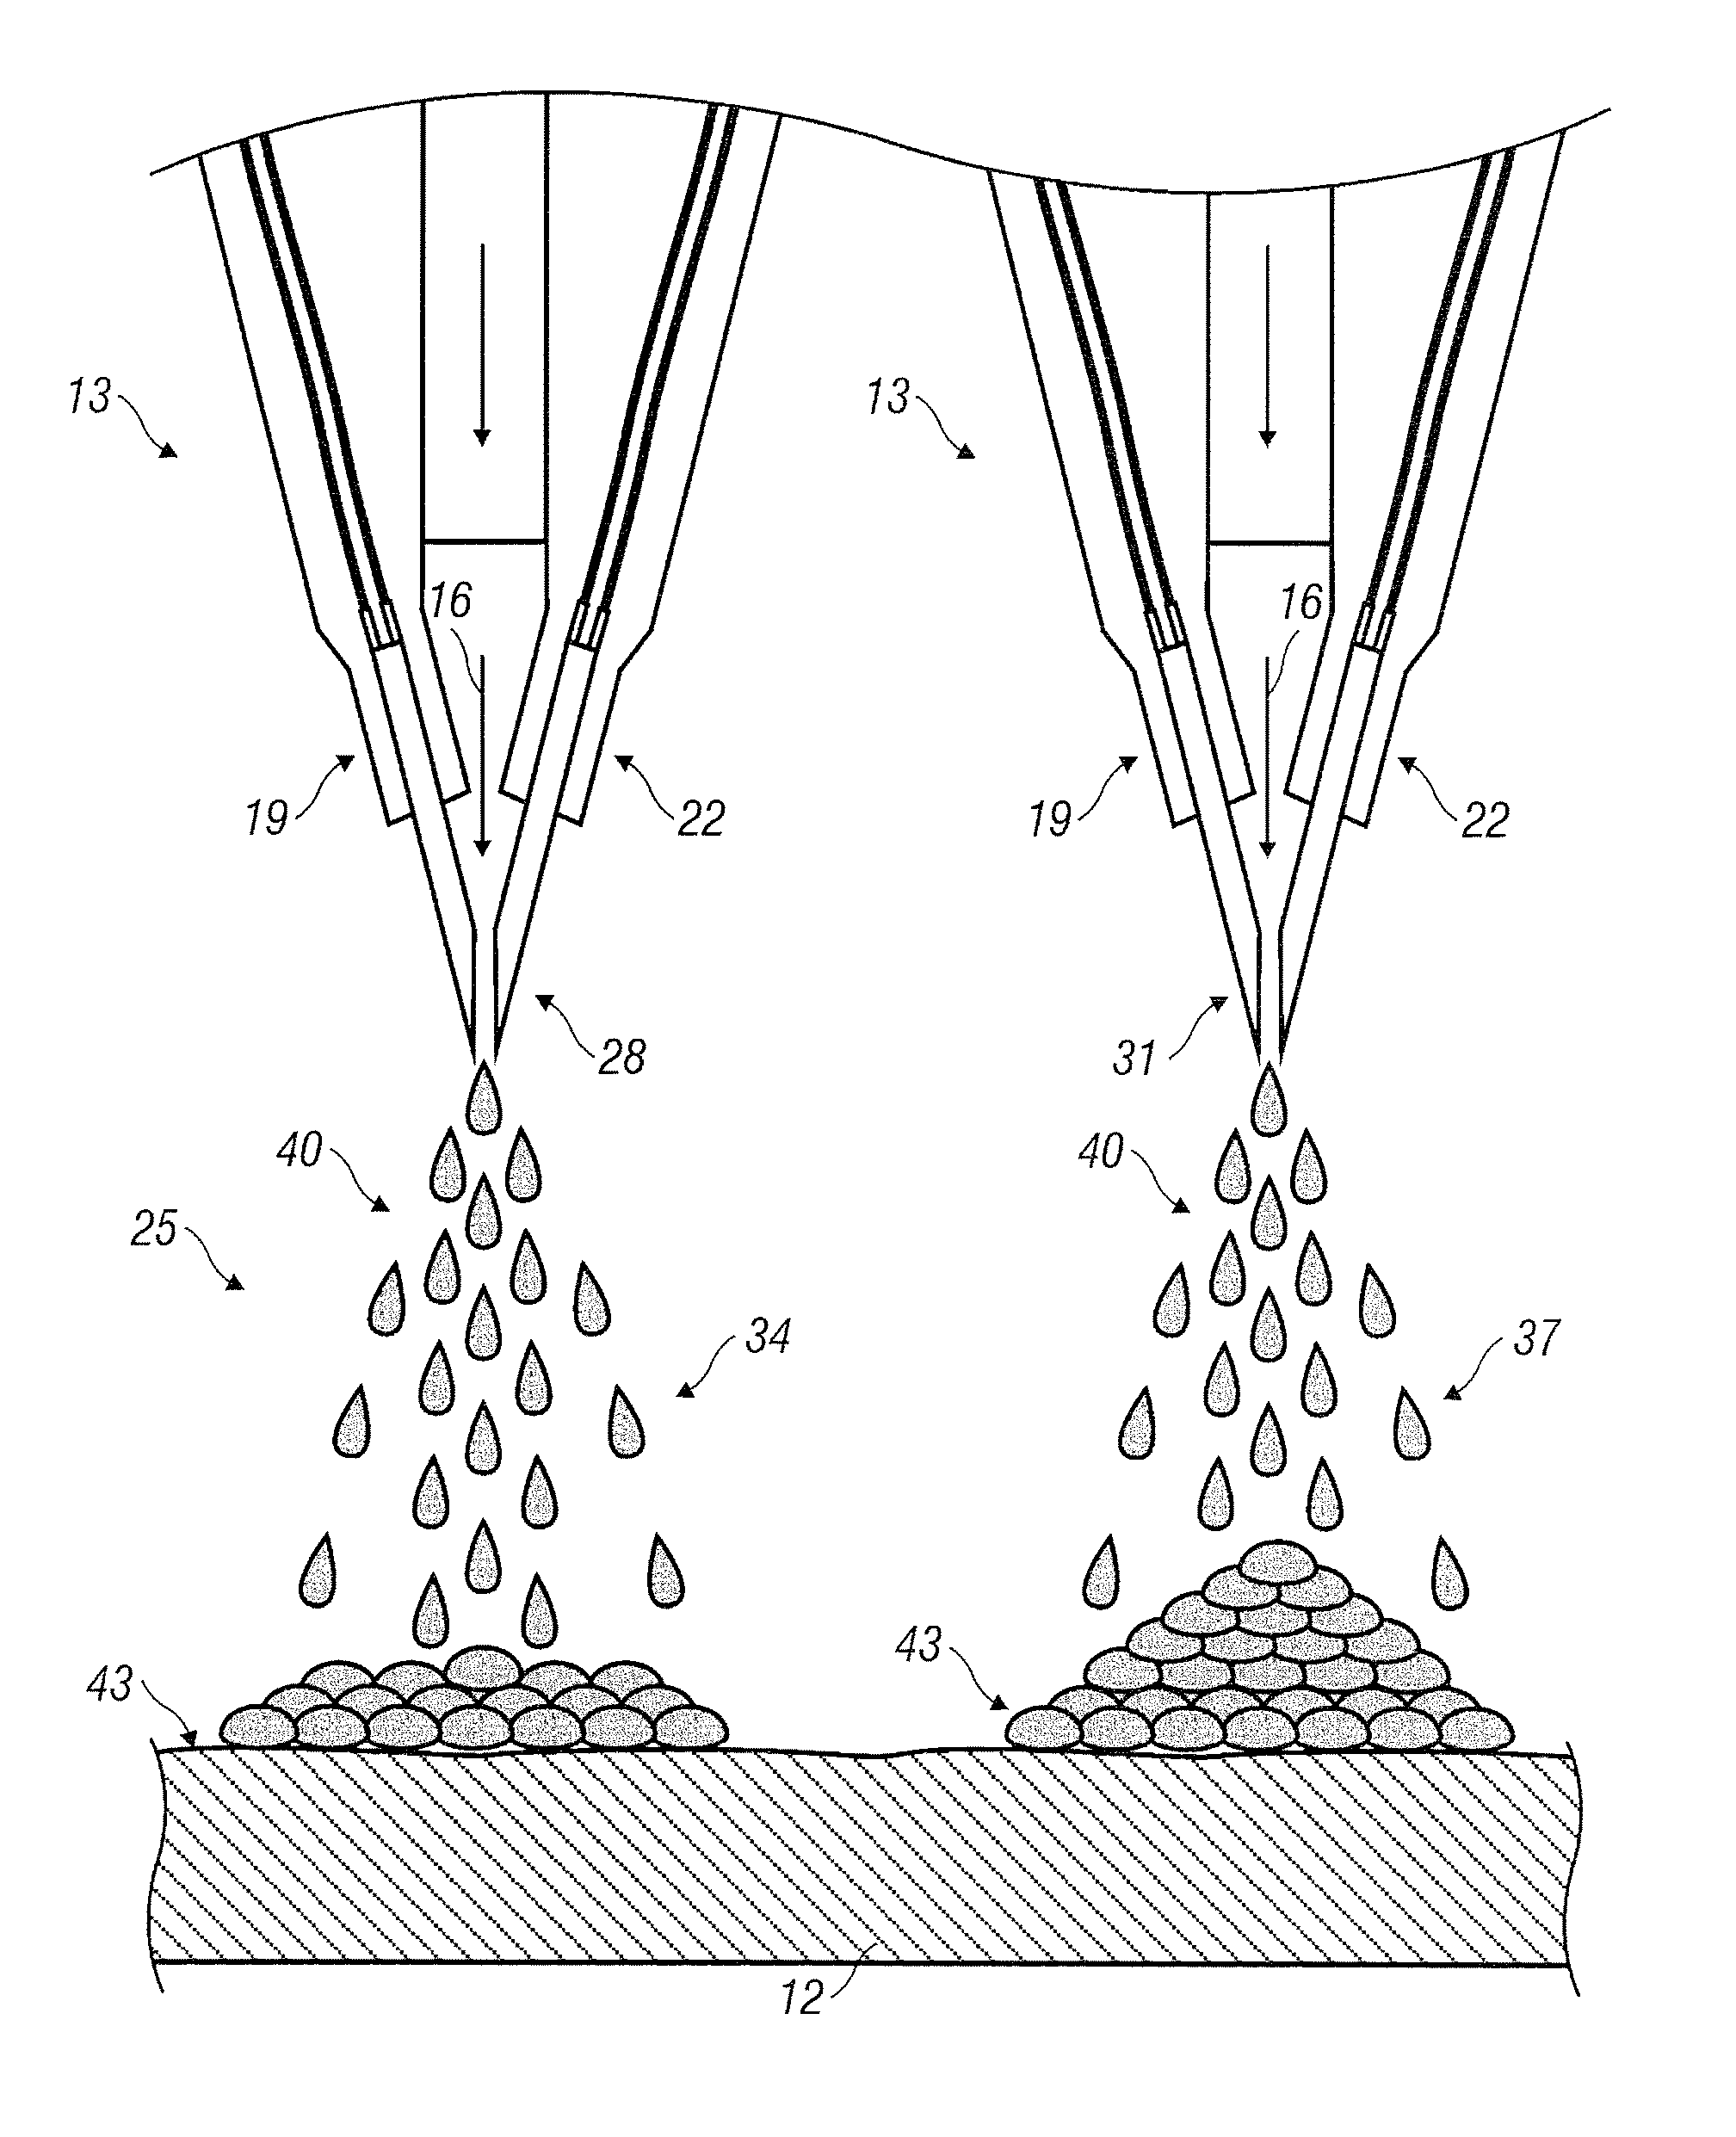 Spray-formed articles made of pseudo-alloy and method for making the same